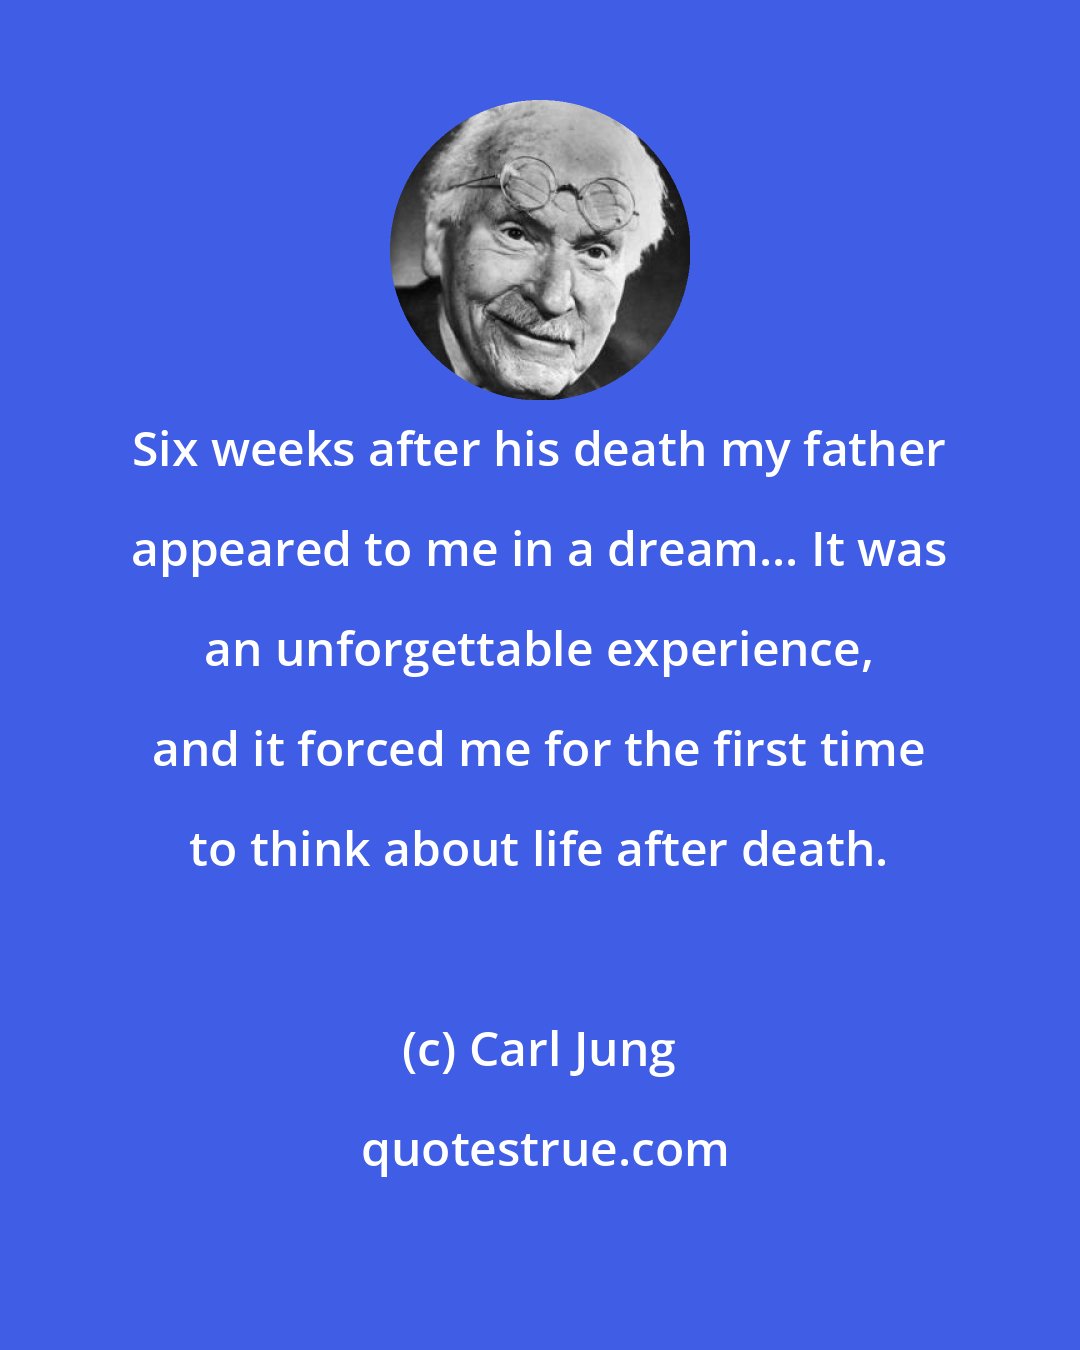 Carl Jung: Six weeks after his death my father appeared to me in a dream... It was an unforgettable experience, and it forced me for the first time to think about life after death.